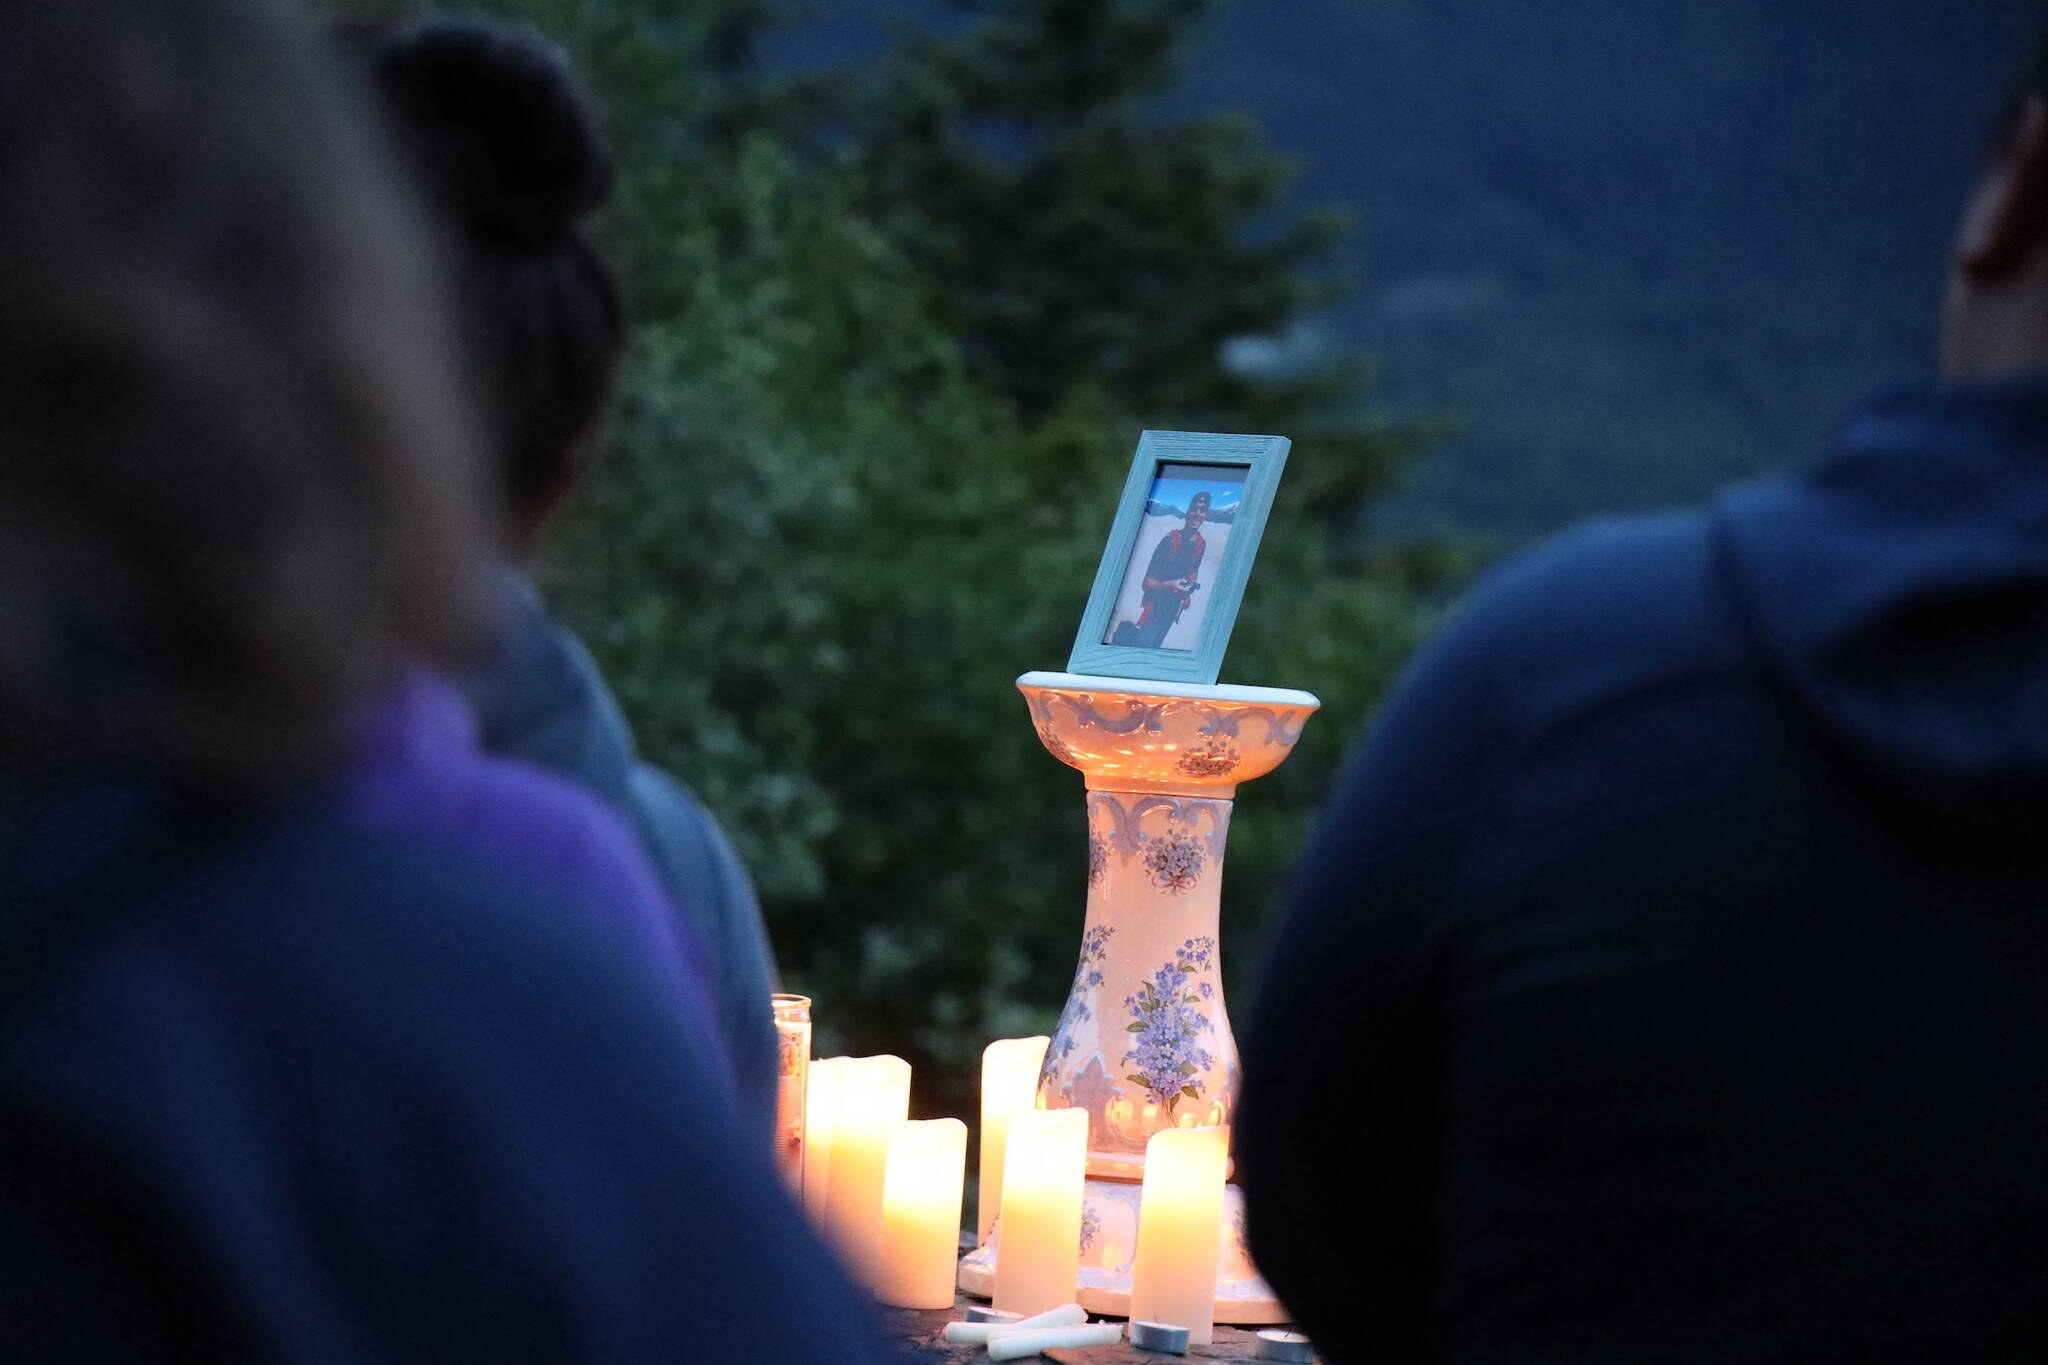 People attend a candlelit vigil that was held at the Mendenhall Glacier Visitor Center to honor Paul Rodriguez Jr., pictured, who drowned while kayaking on Mendenhall Lake in July. The search for his body has been called off following the record flooding from Suicide Basin during the weekend, officials say. (Clarise Larson / Juneau Empire File)